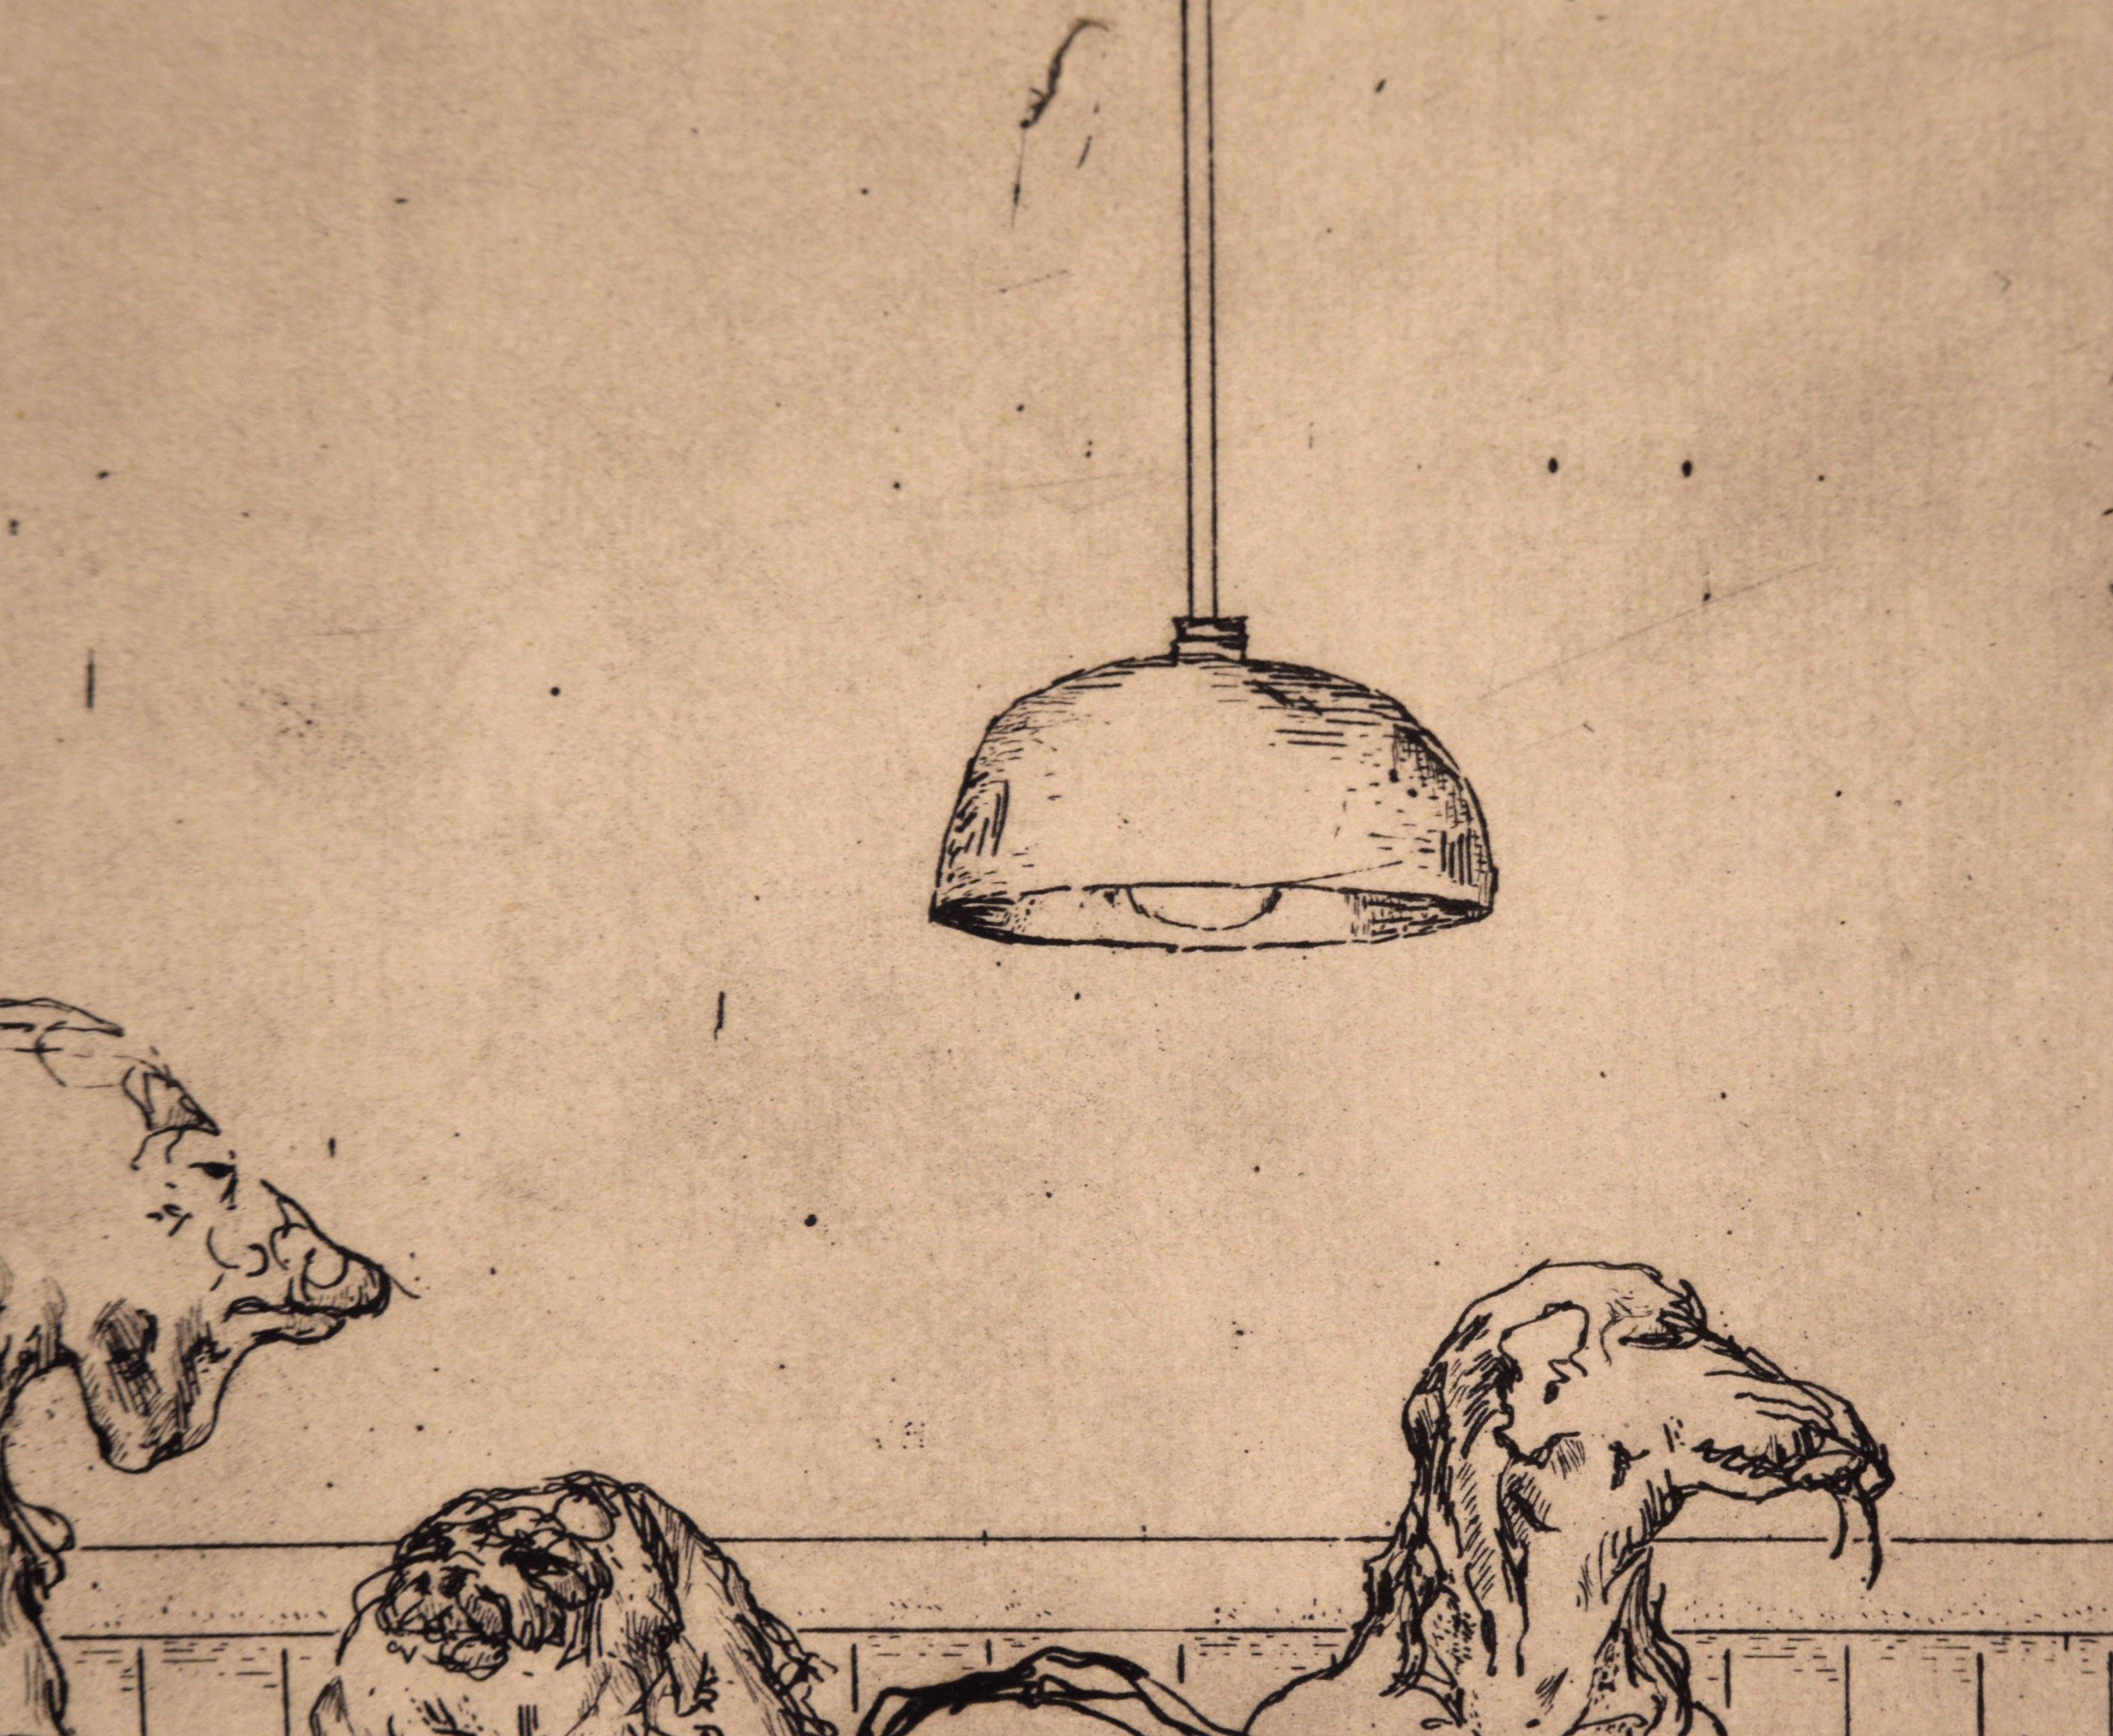 Conversations at the Bar - Figurative Animal Etching - Contemporary Print by Stephen Martin